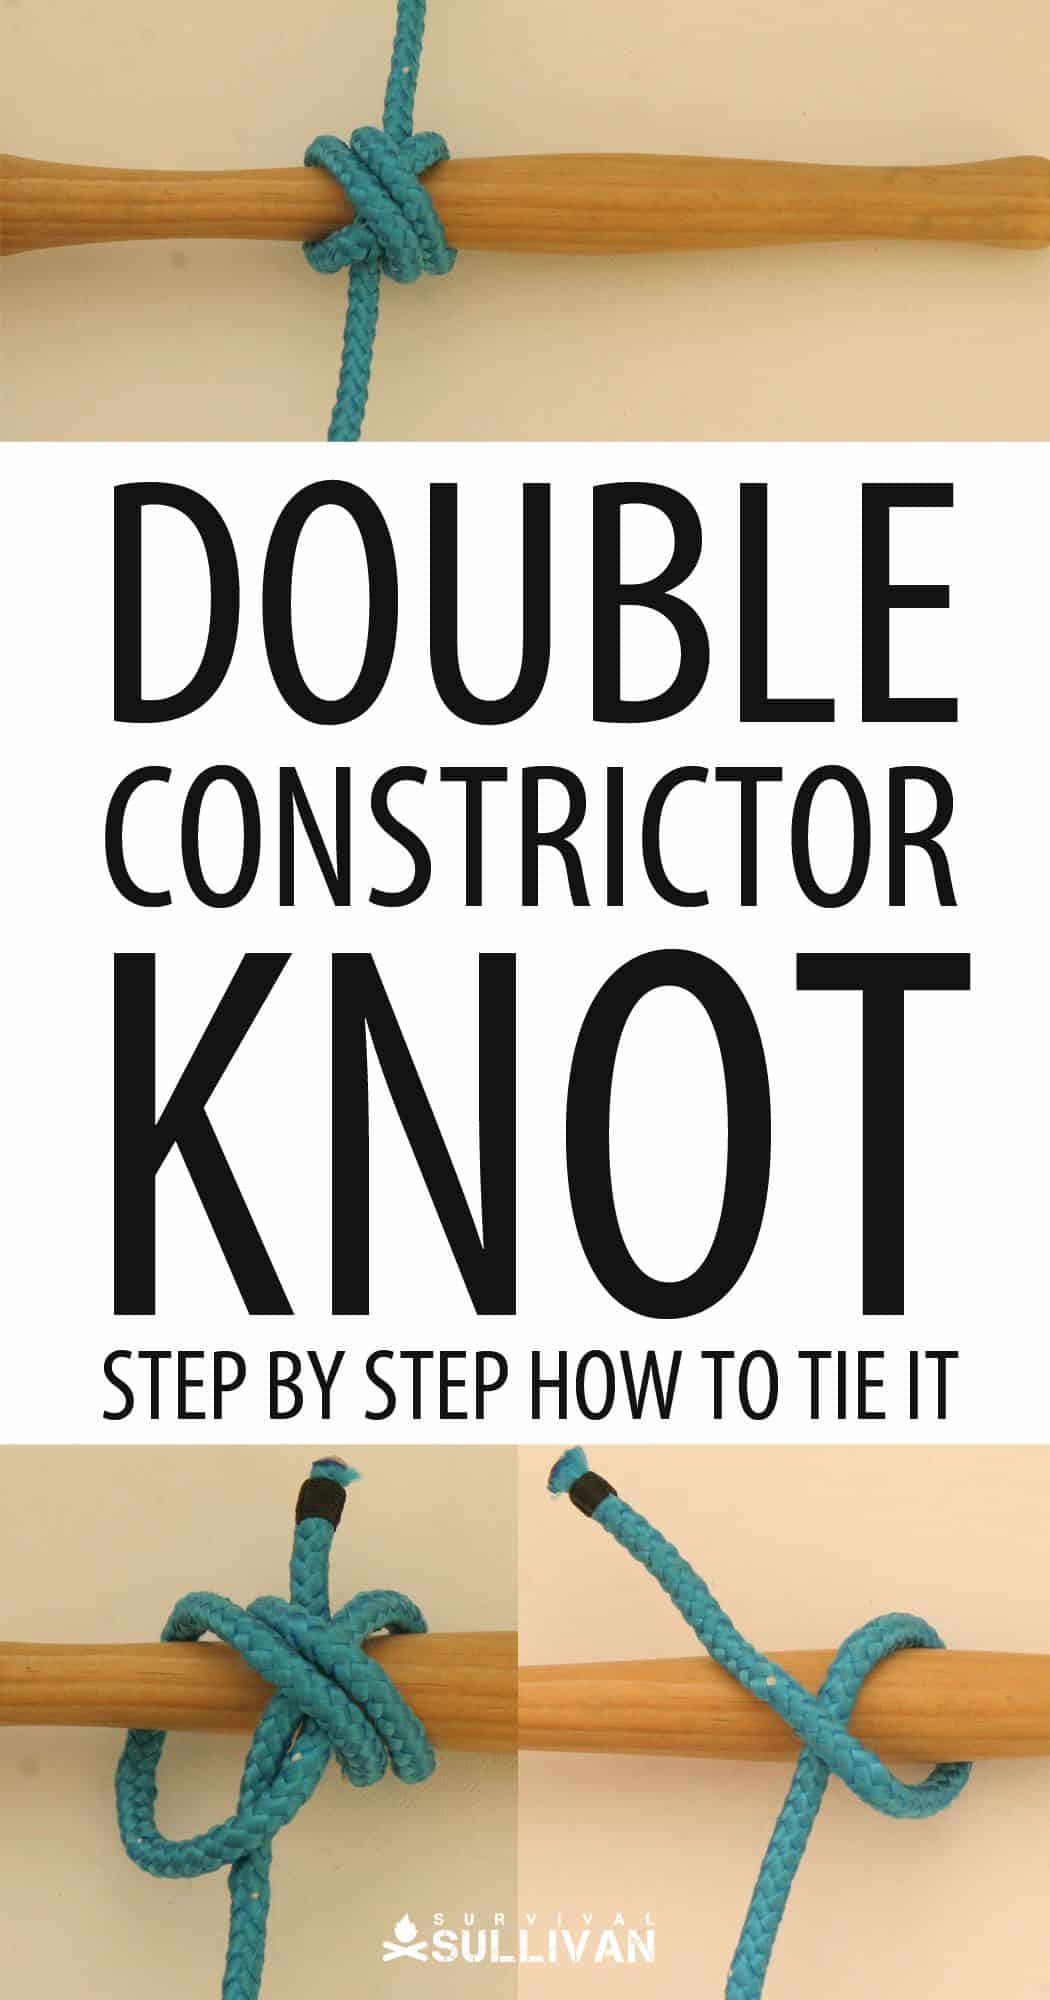 double constrictor knot pinterest image